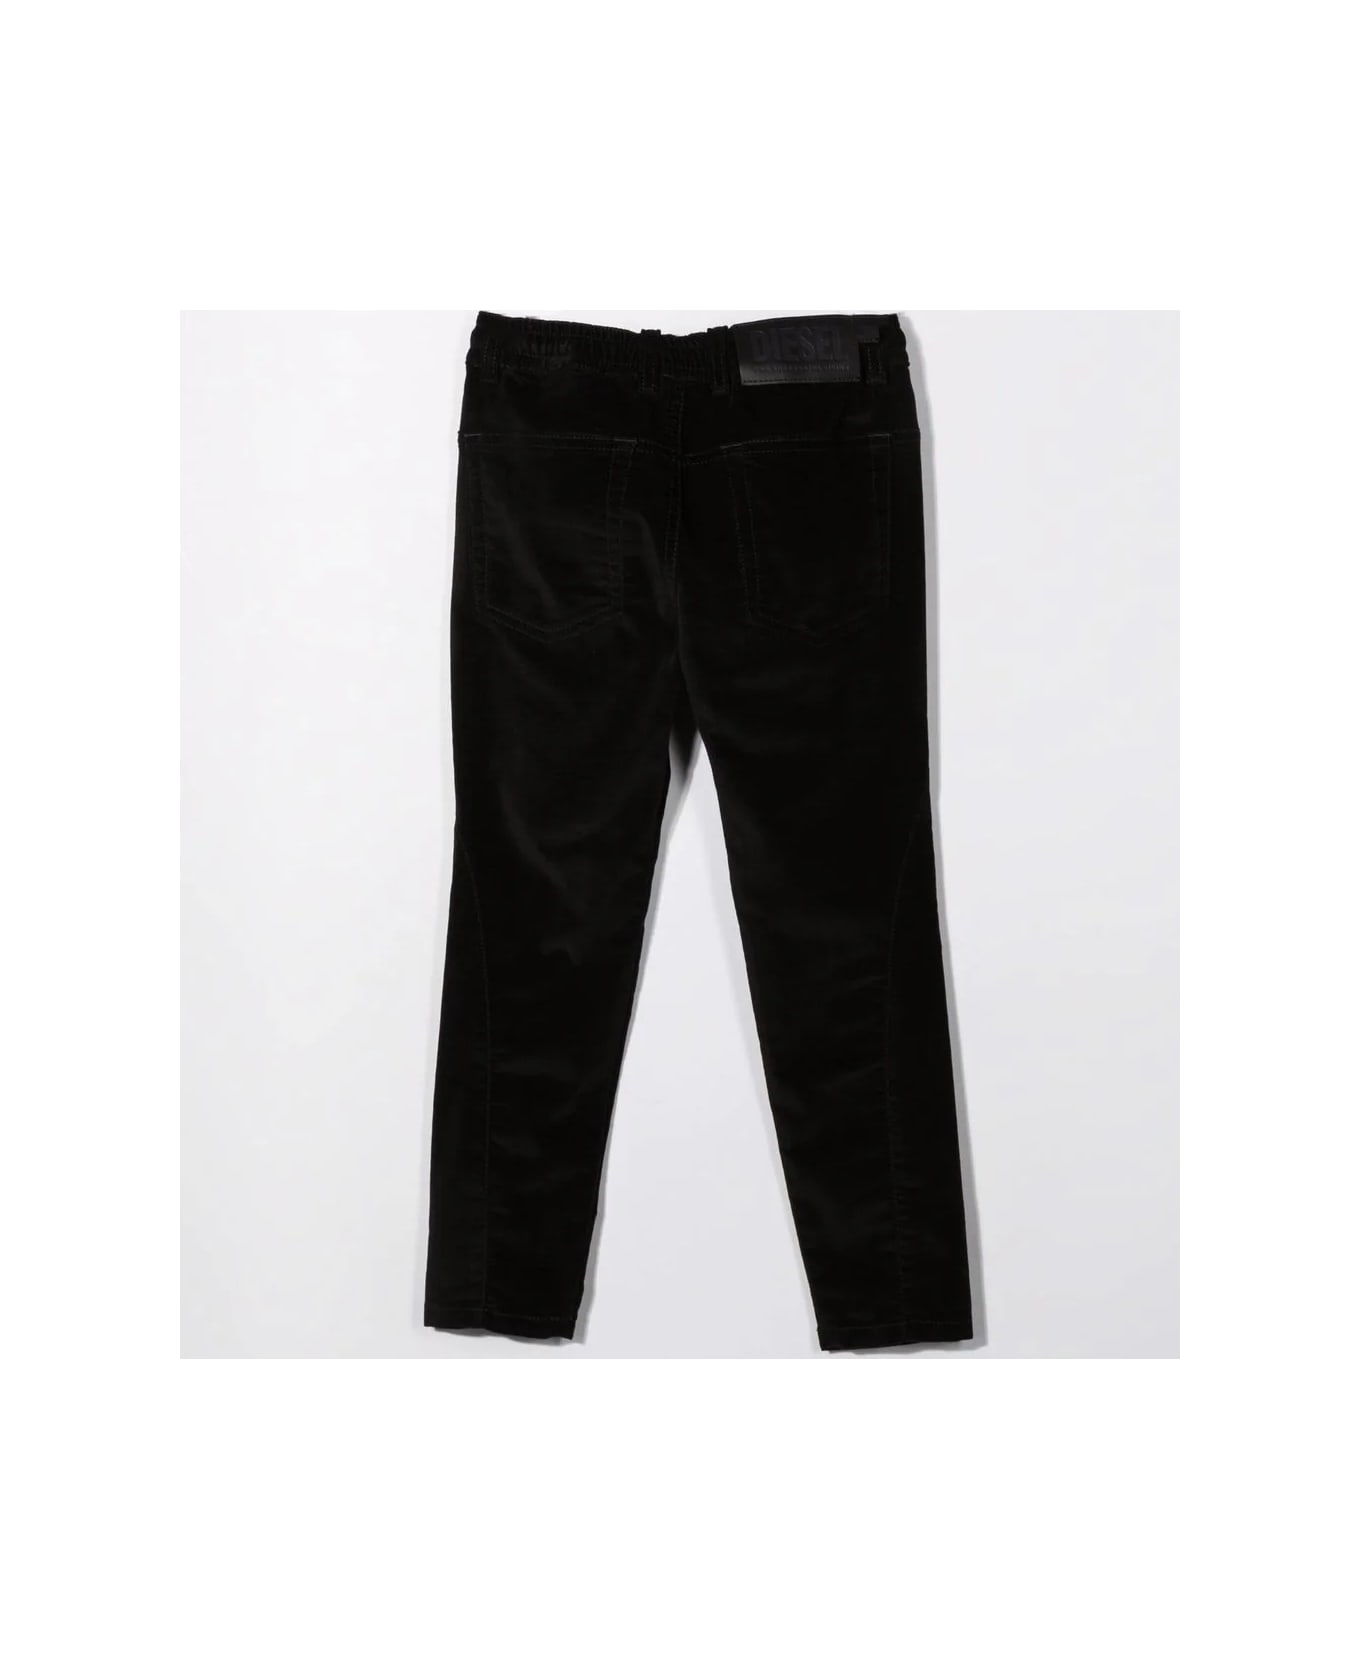 Diesel Tapered Trousers - Black ボトムス